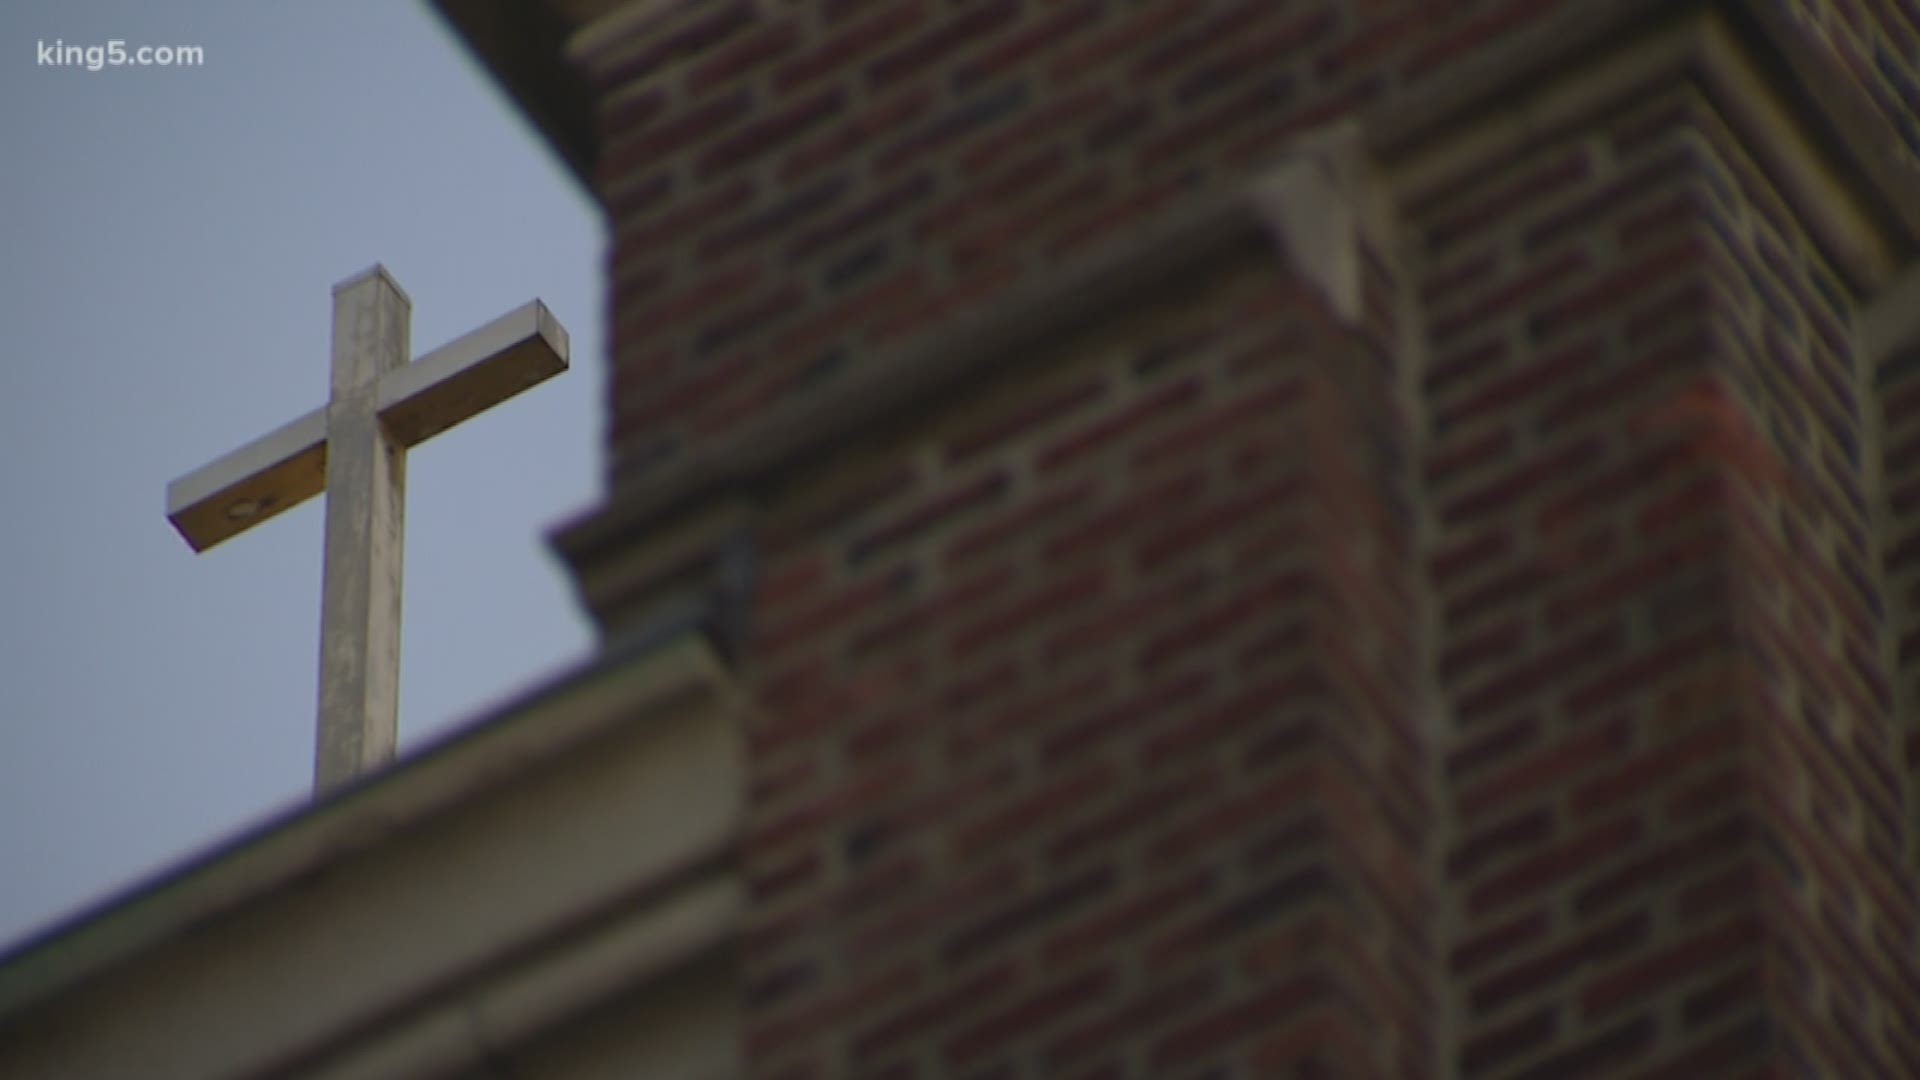 The Holy Rosary Church in Tacoma has been closed since October due to "significant safety issues.” On Saturday, parishioners learned the fate of their house of worship. KING 5's Tony Black reports.